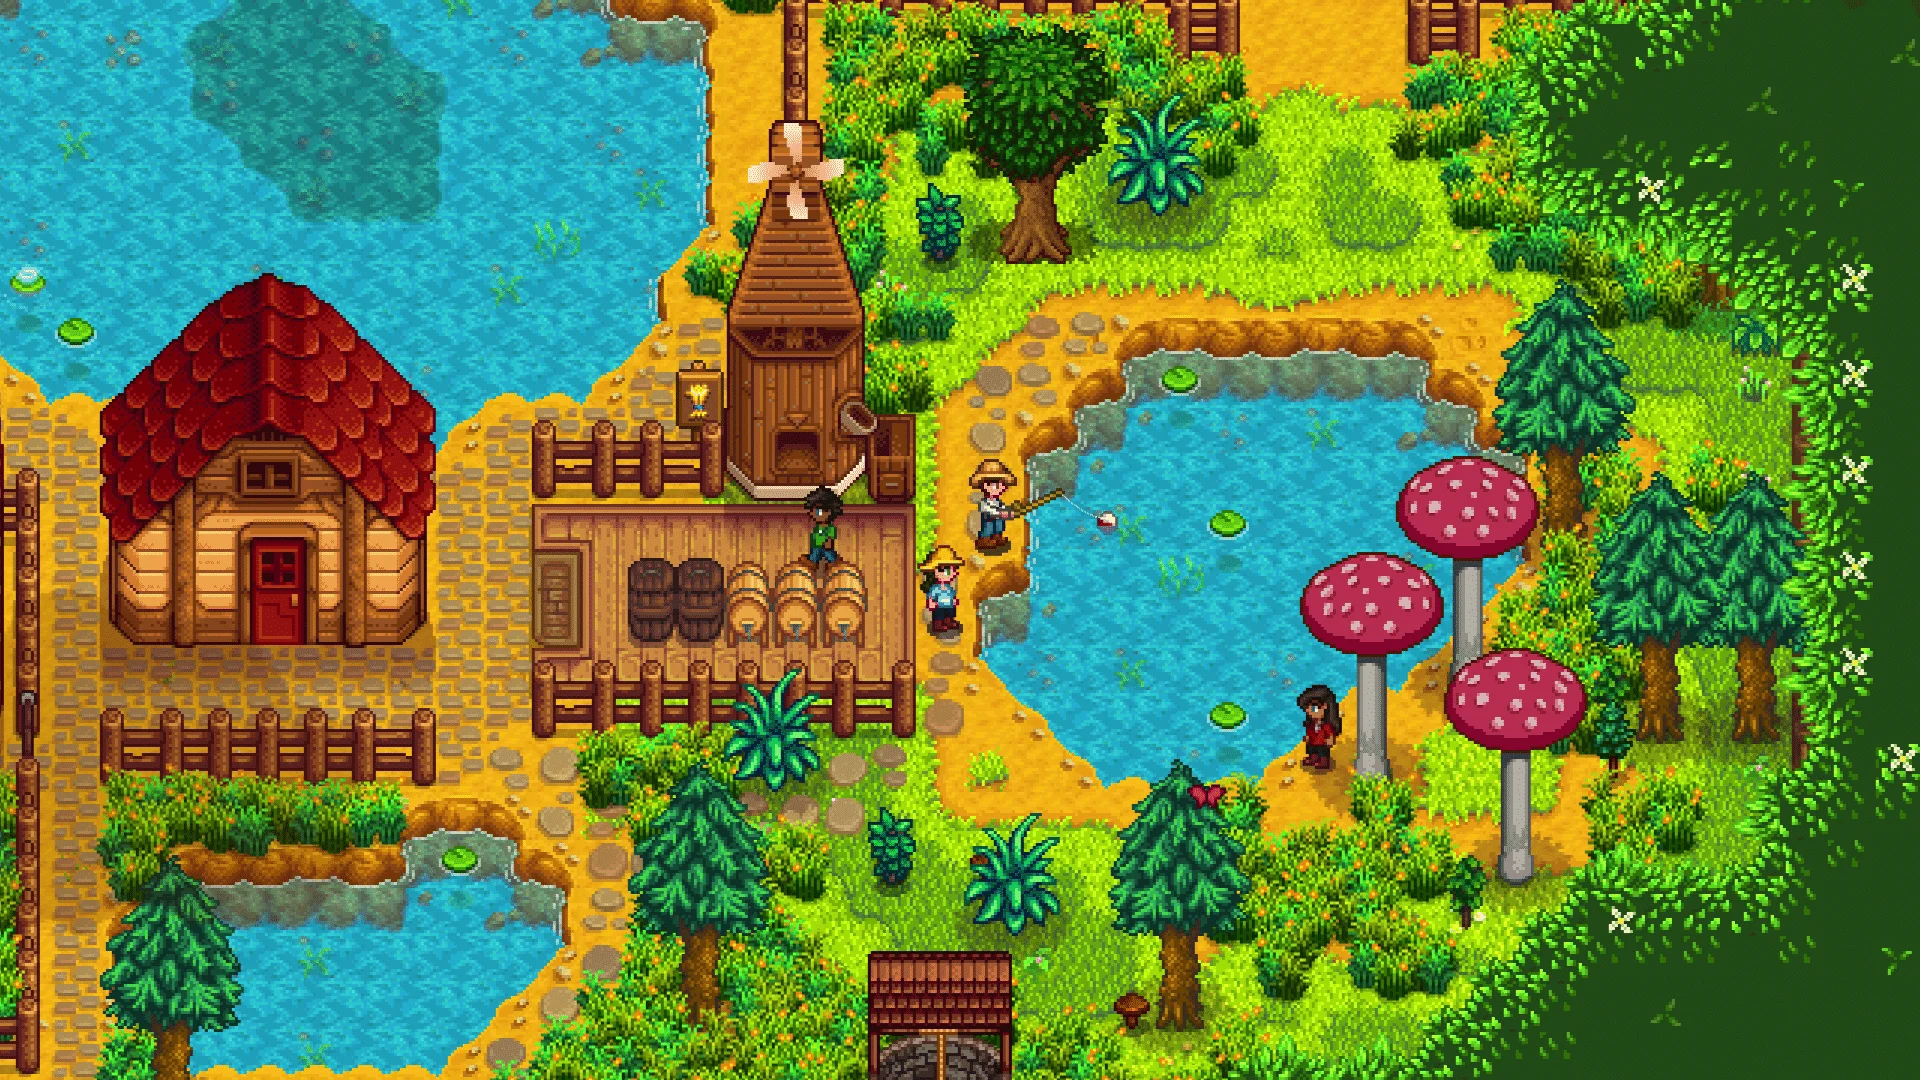 Stardew Valley update coming in March